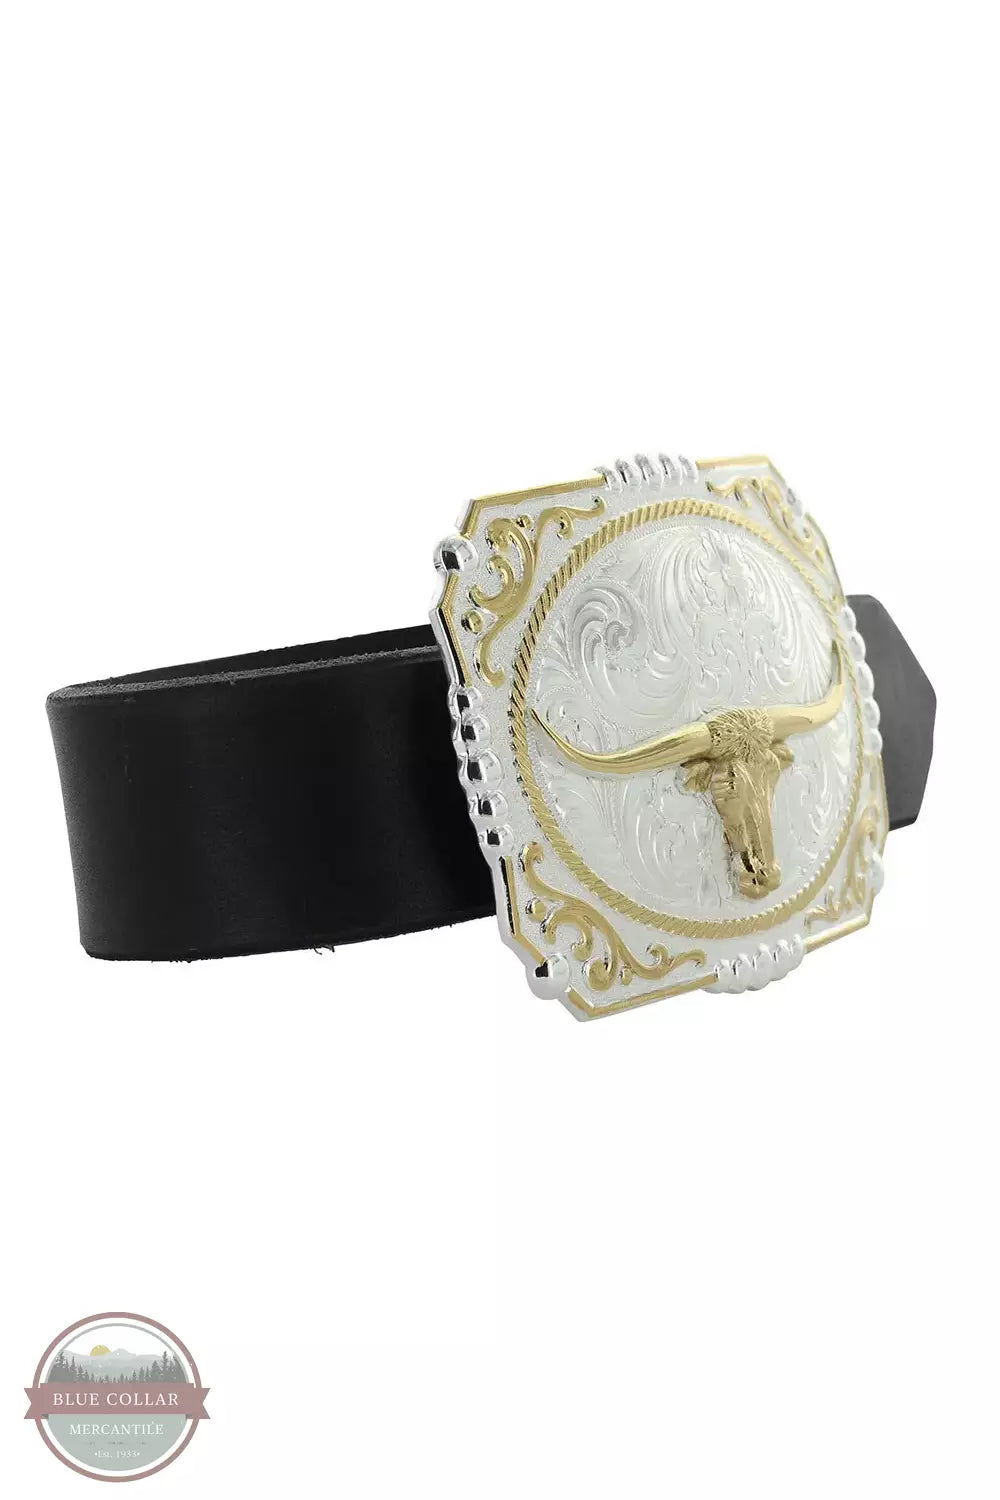 Montana Silversmith 25815-767 Two-Tone Cowboy Cameo Buckle with Longhorn Belt View